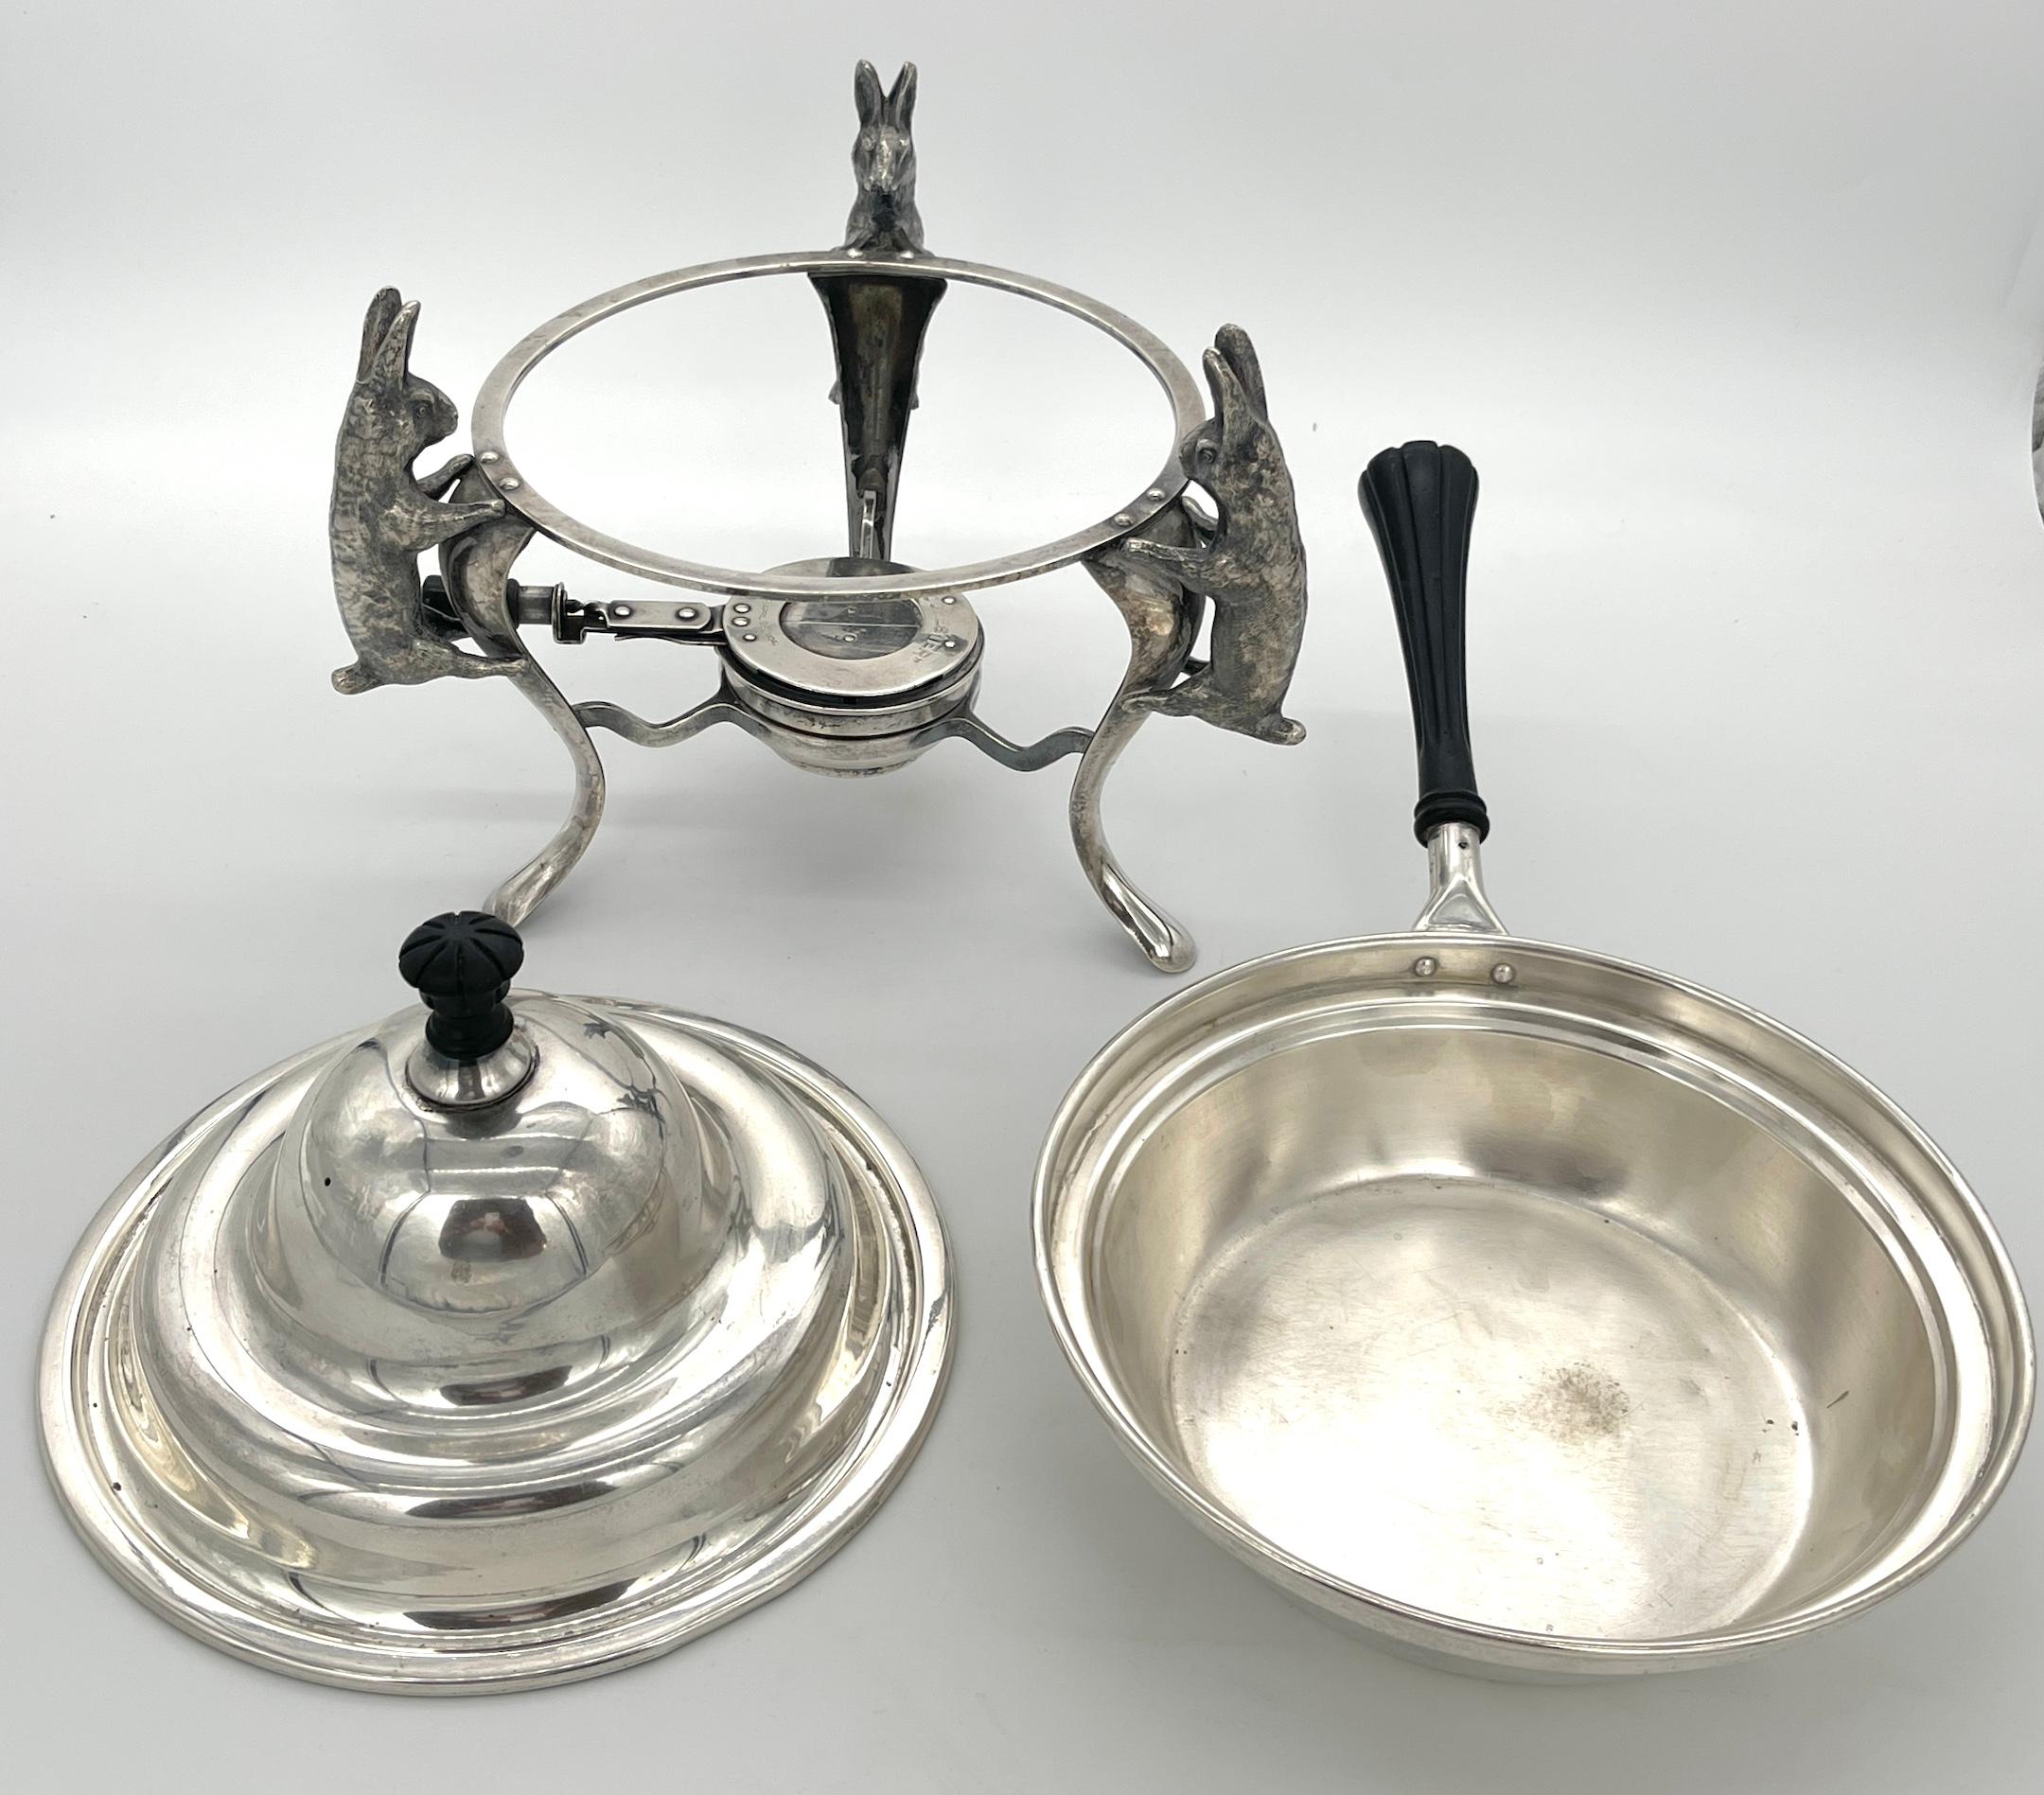 Joseph Heinrichs Silverplated & Ebony 3-D Rabbit Chafing Dish, Circa 1904 In Good Condition For Sale In West Palm Beach, FL